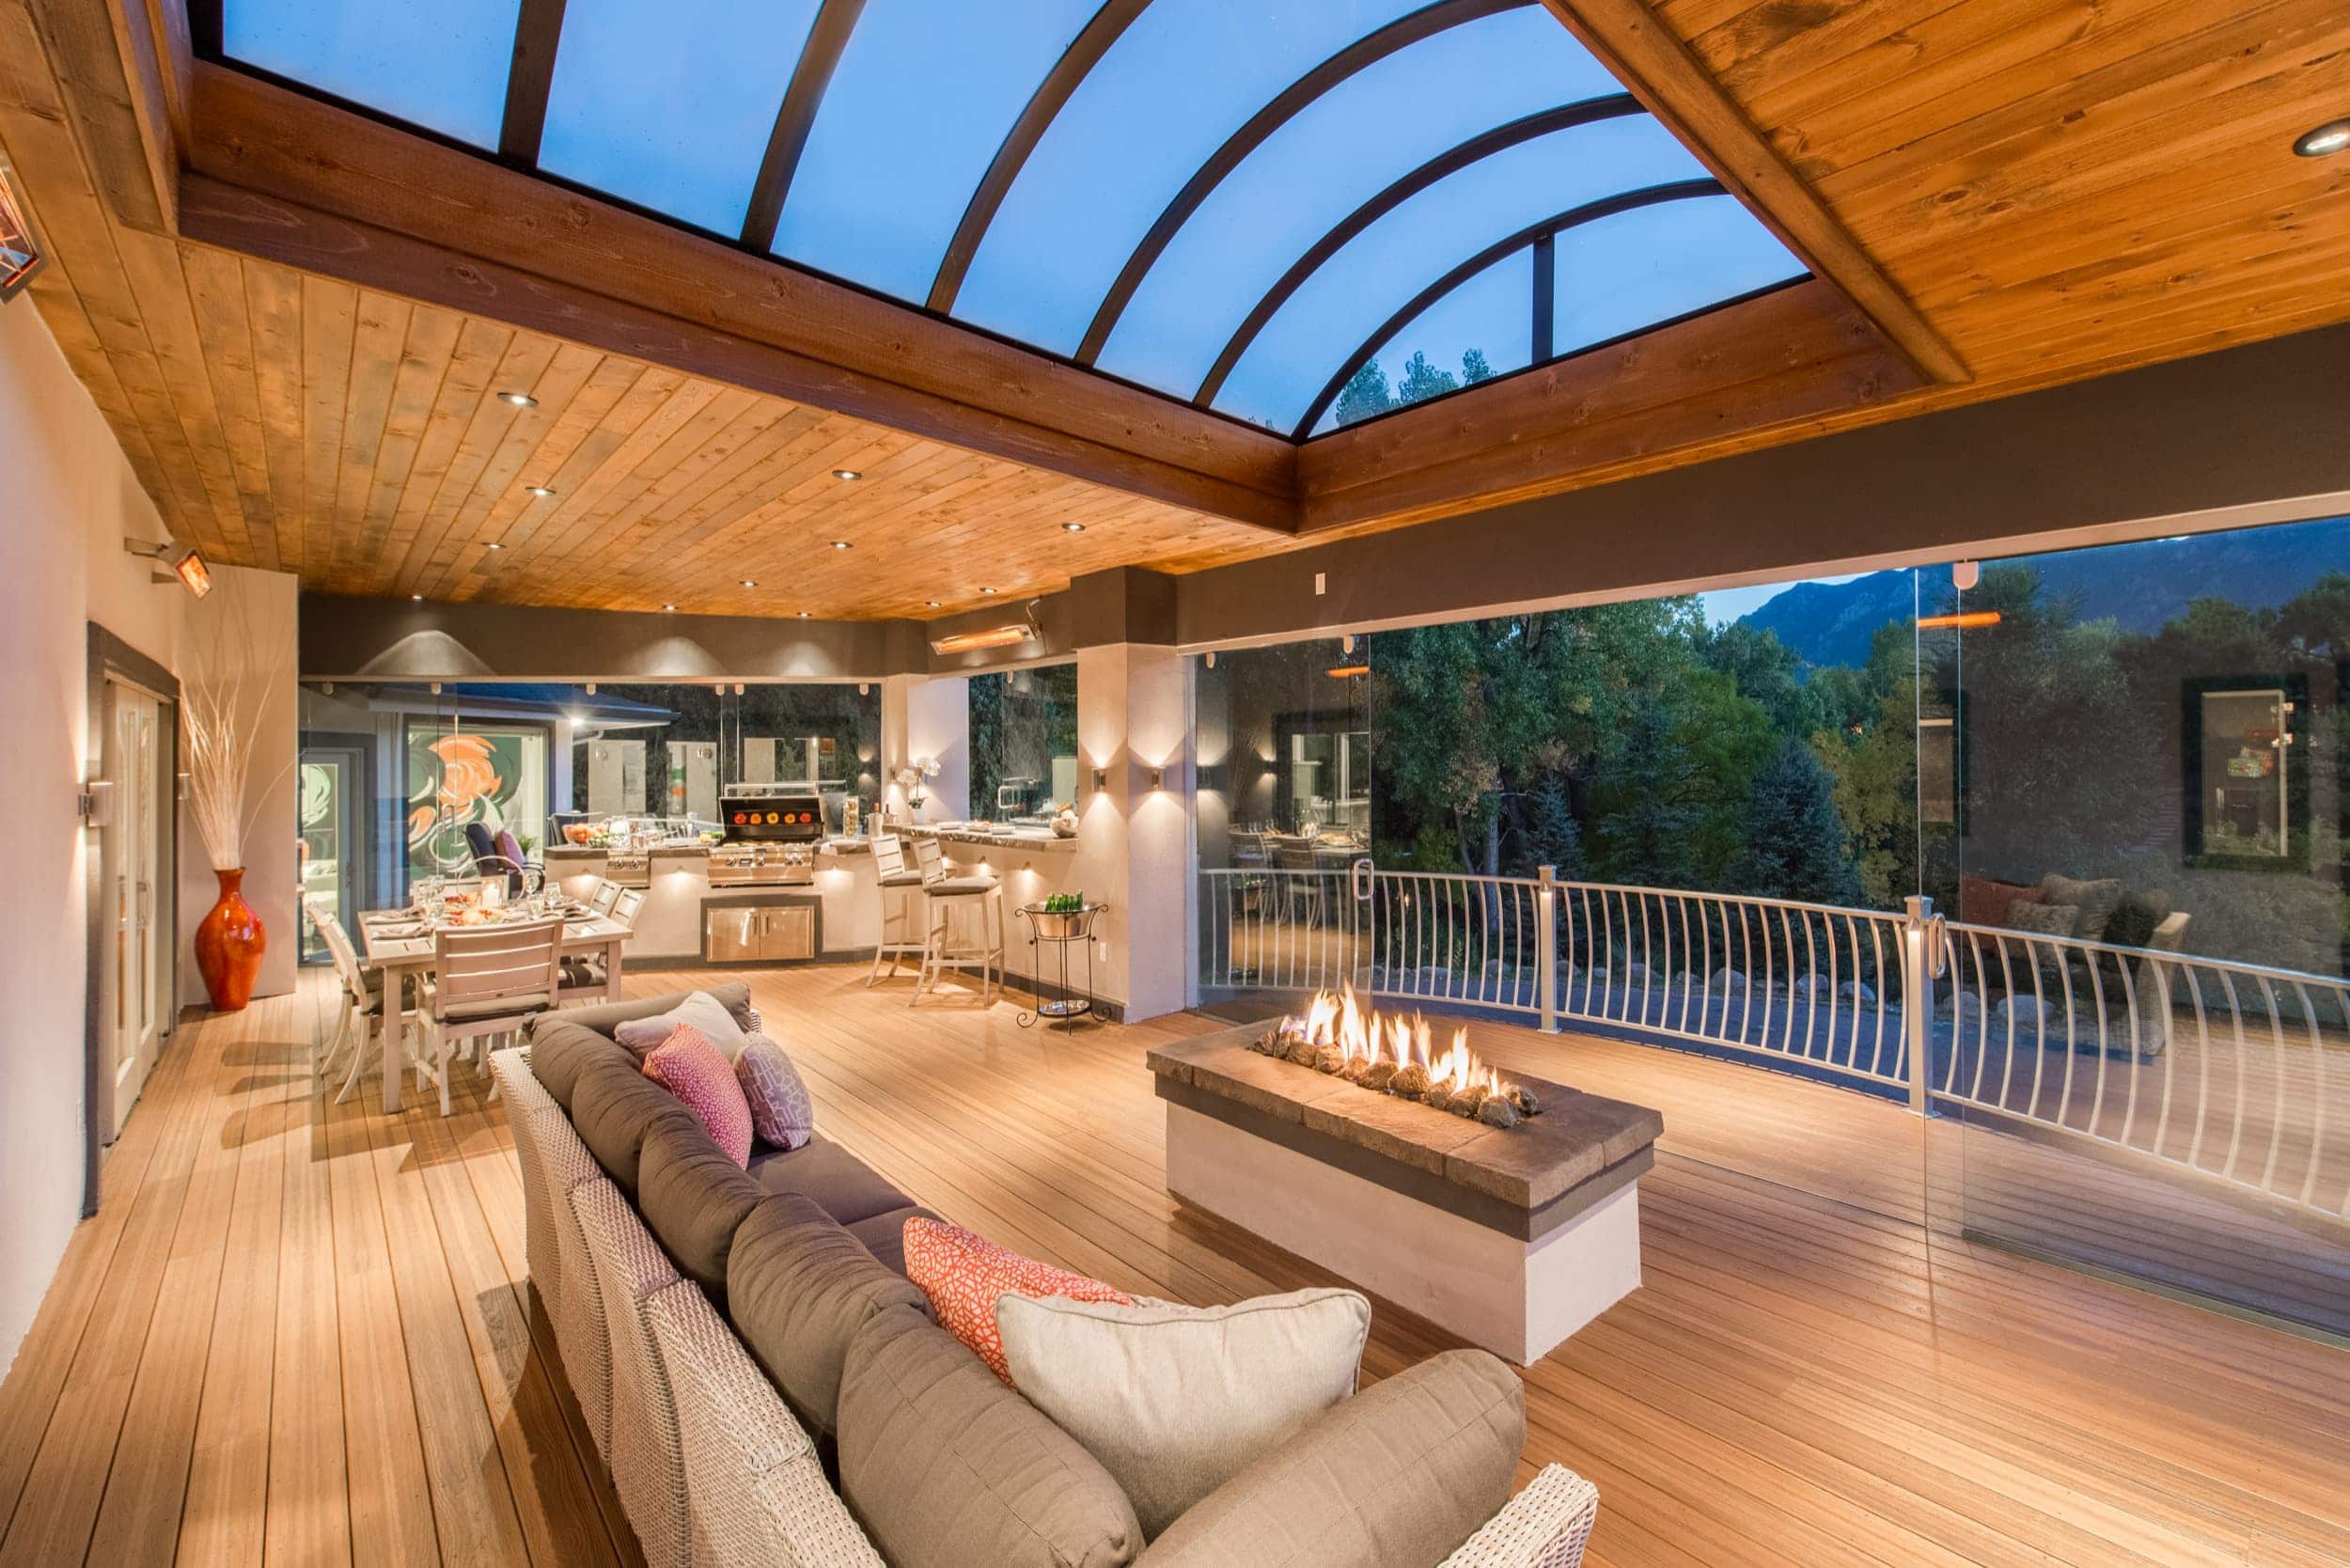 An outdoor living area with a glass roof.